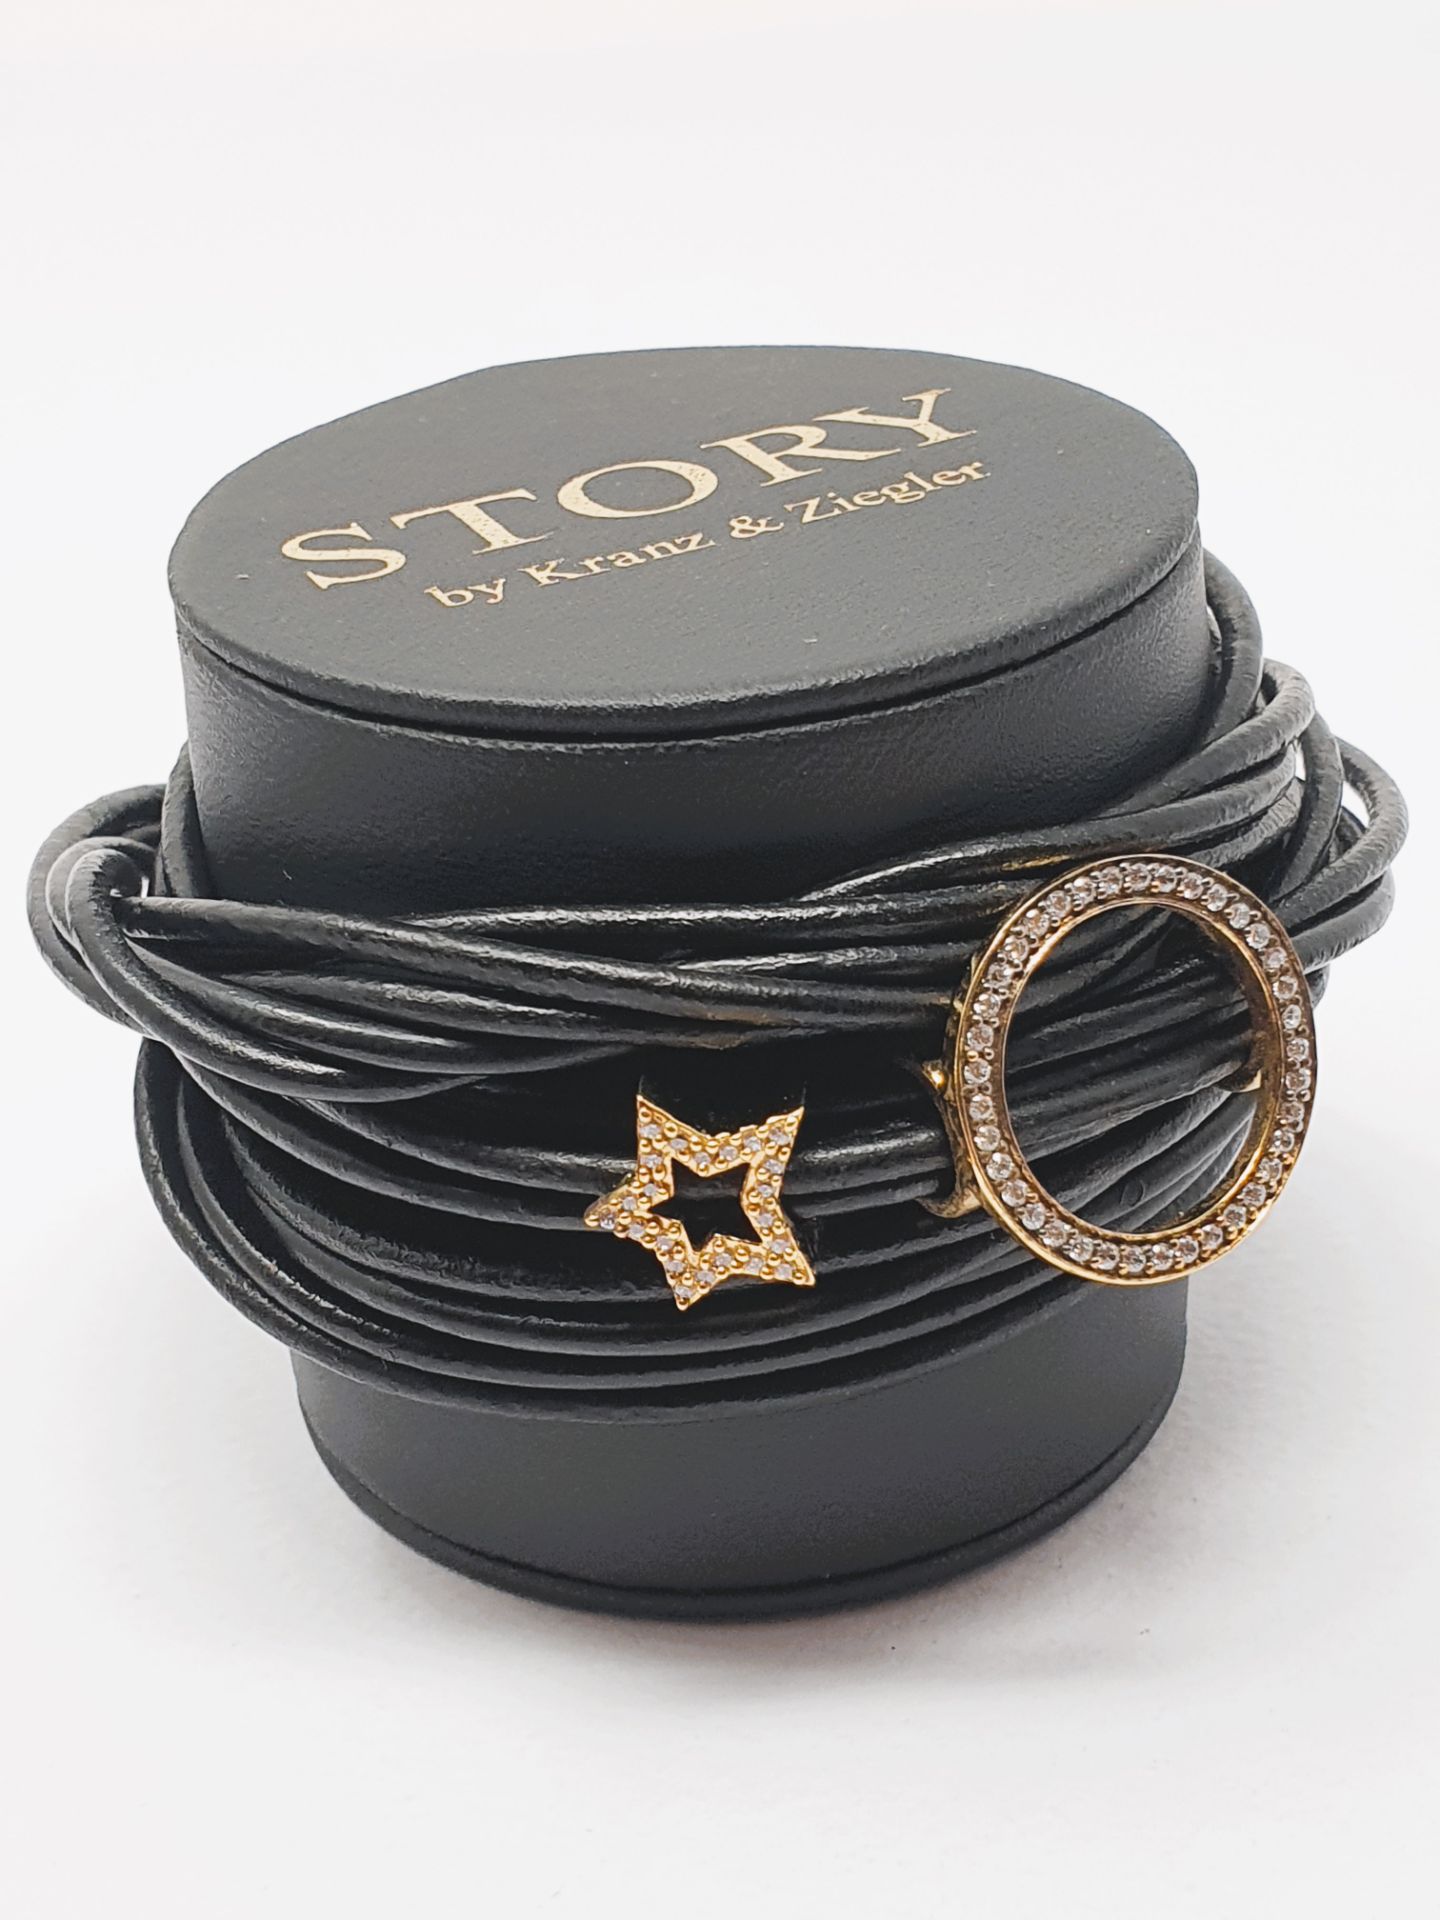 STORY' by Kranz & Ziegler black leather wrap bracelet with two sterling silver charms and watch, - Image 2 of 3